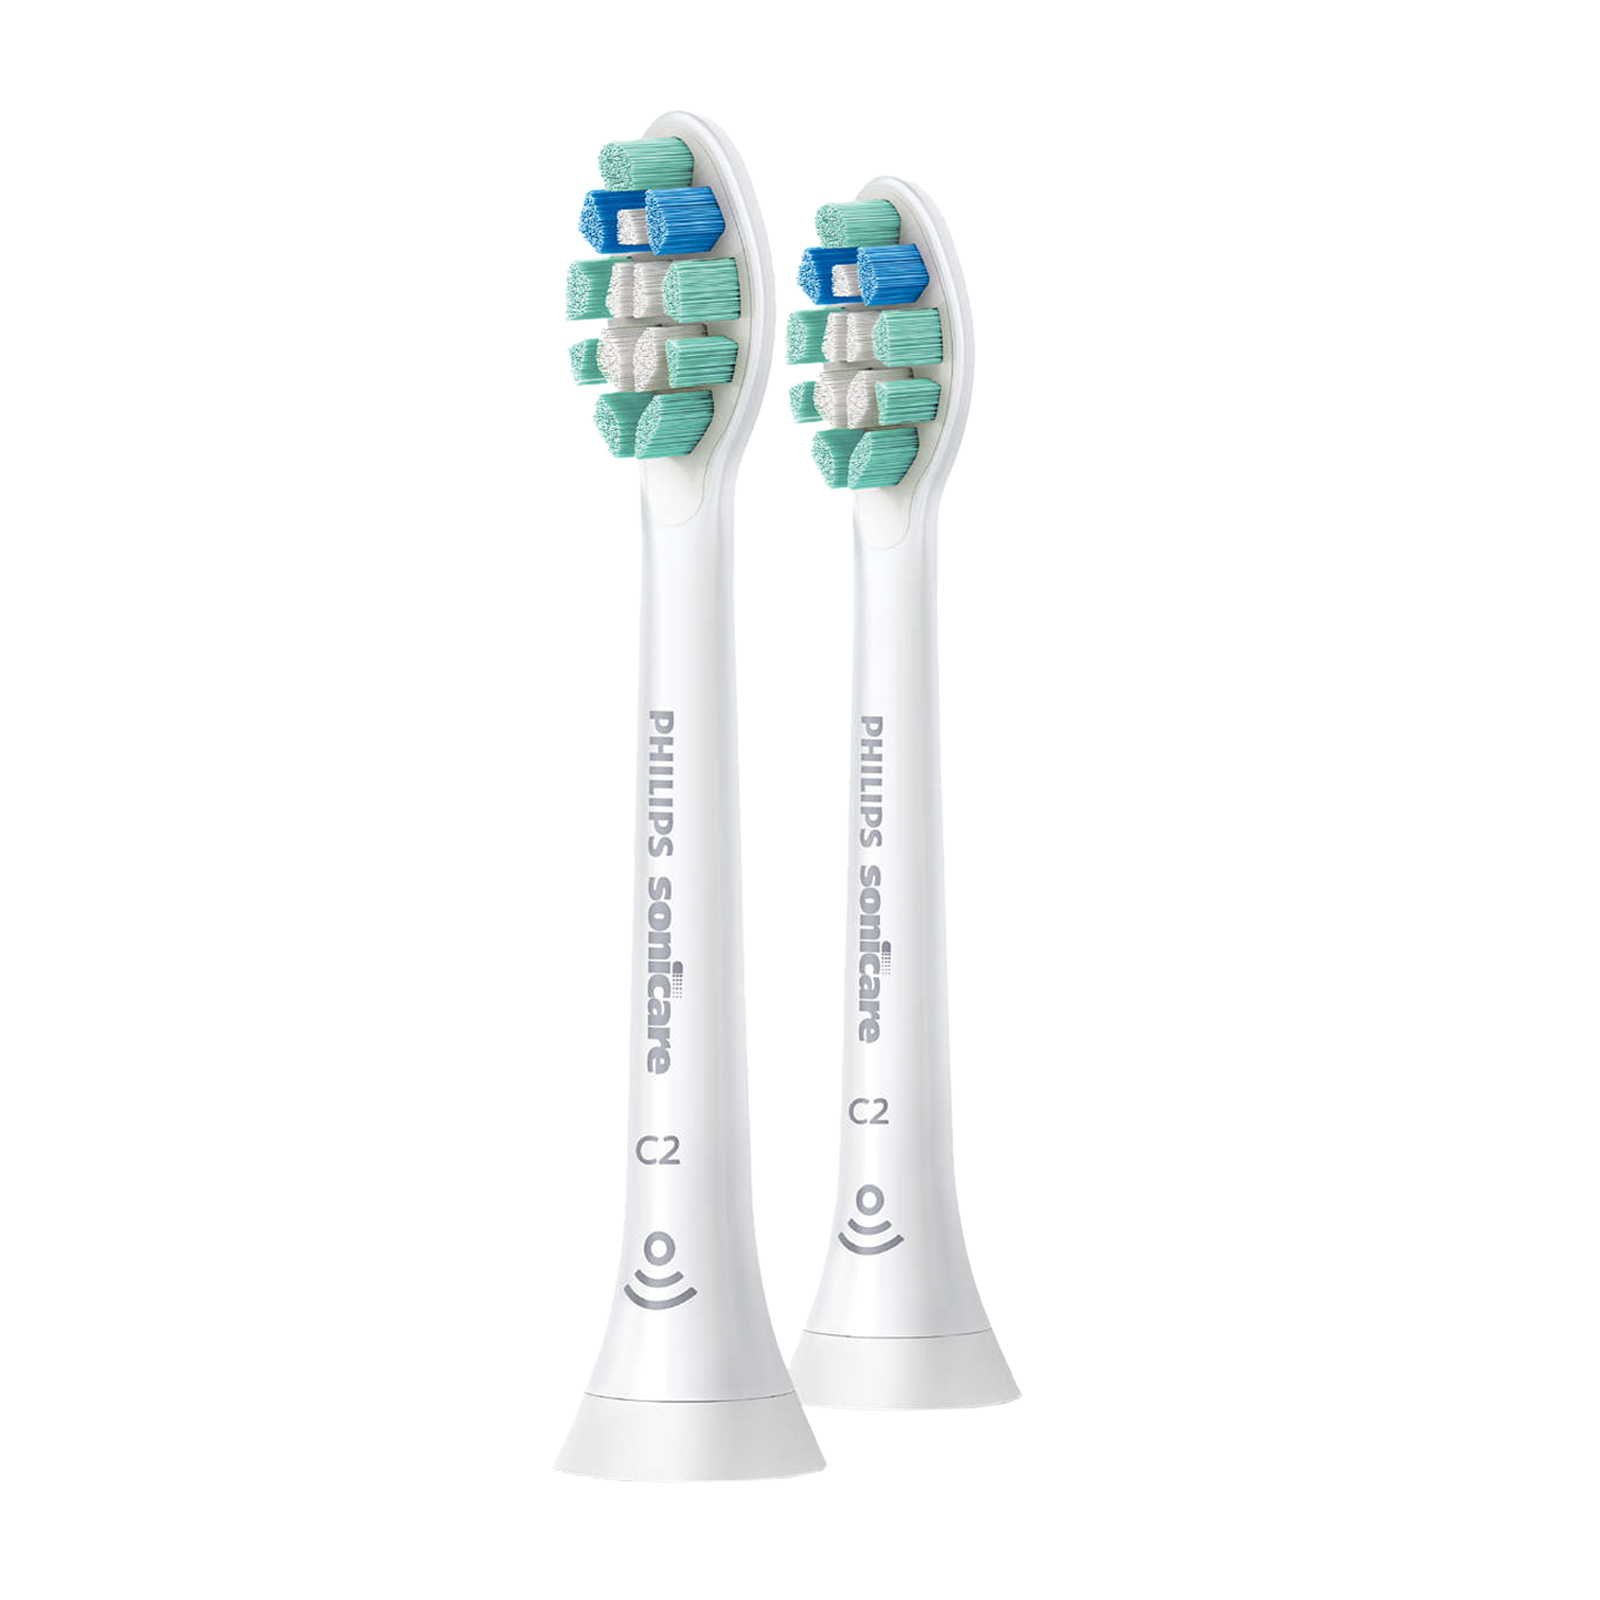 Philips Sonicare C2 Toothbrush Replacement Head (Pack of 2, HX9022/10, White)_1